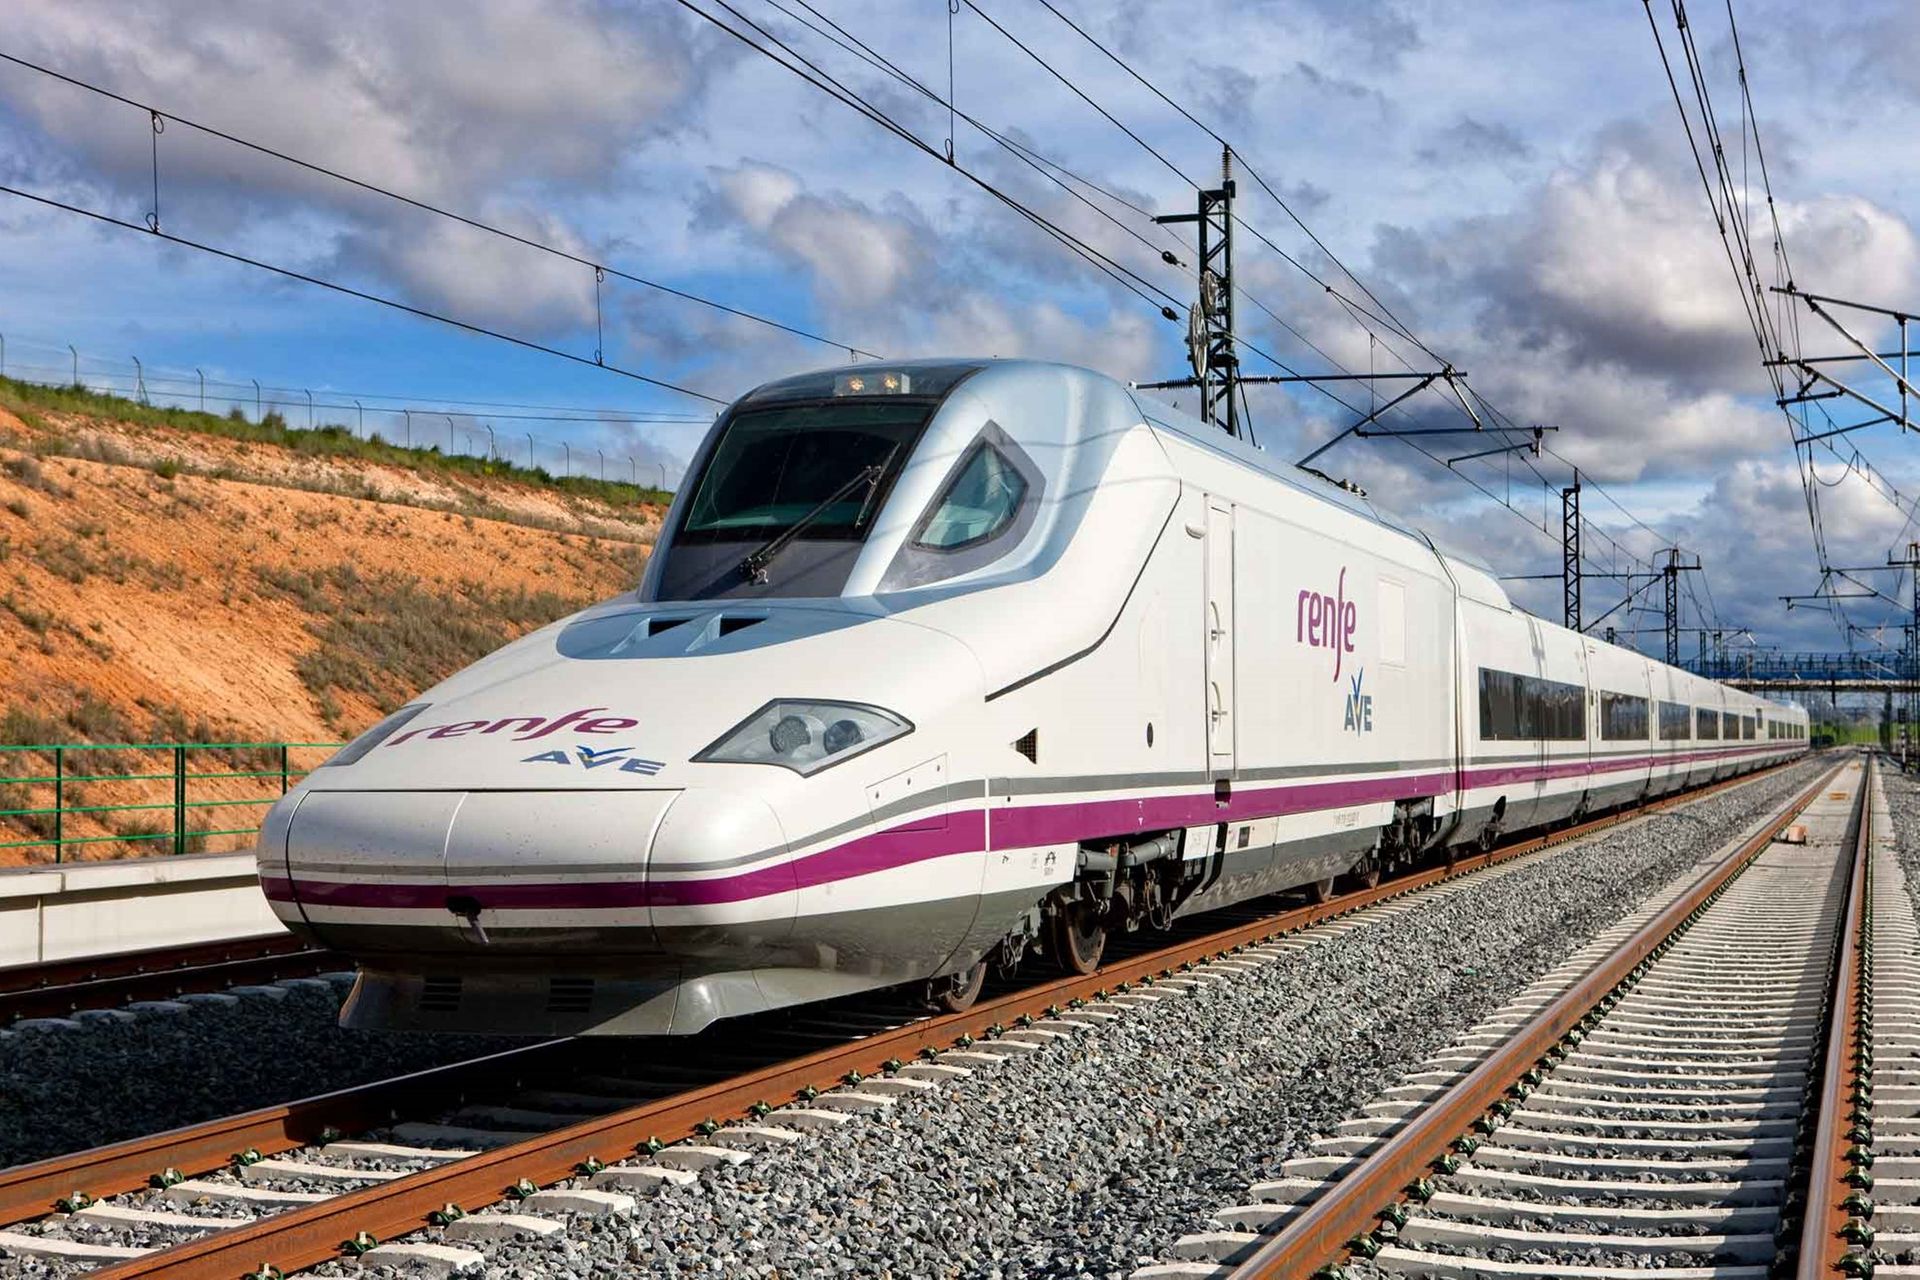 Analysis of the prices of high-speed train tickets in Spain